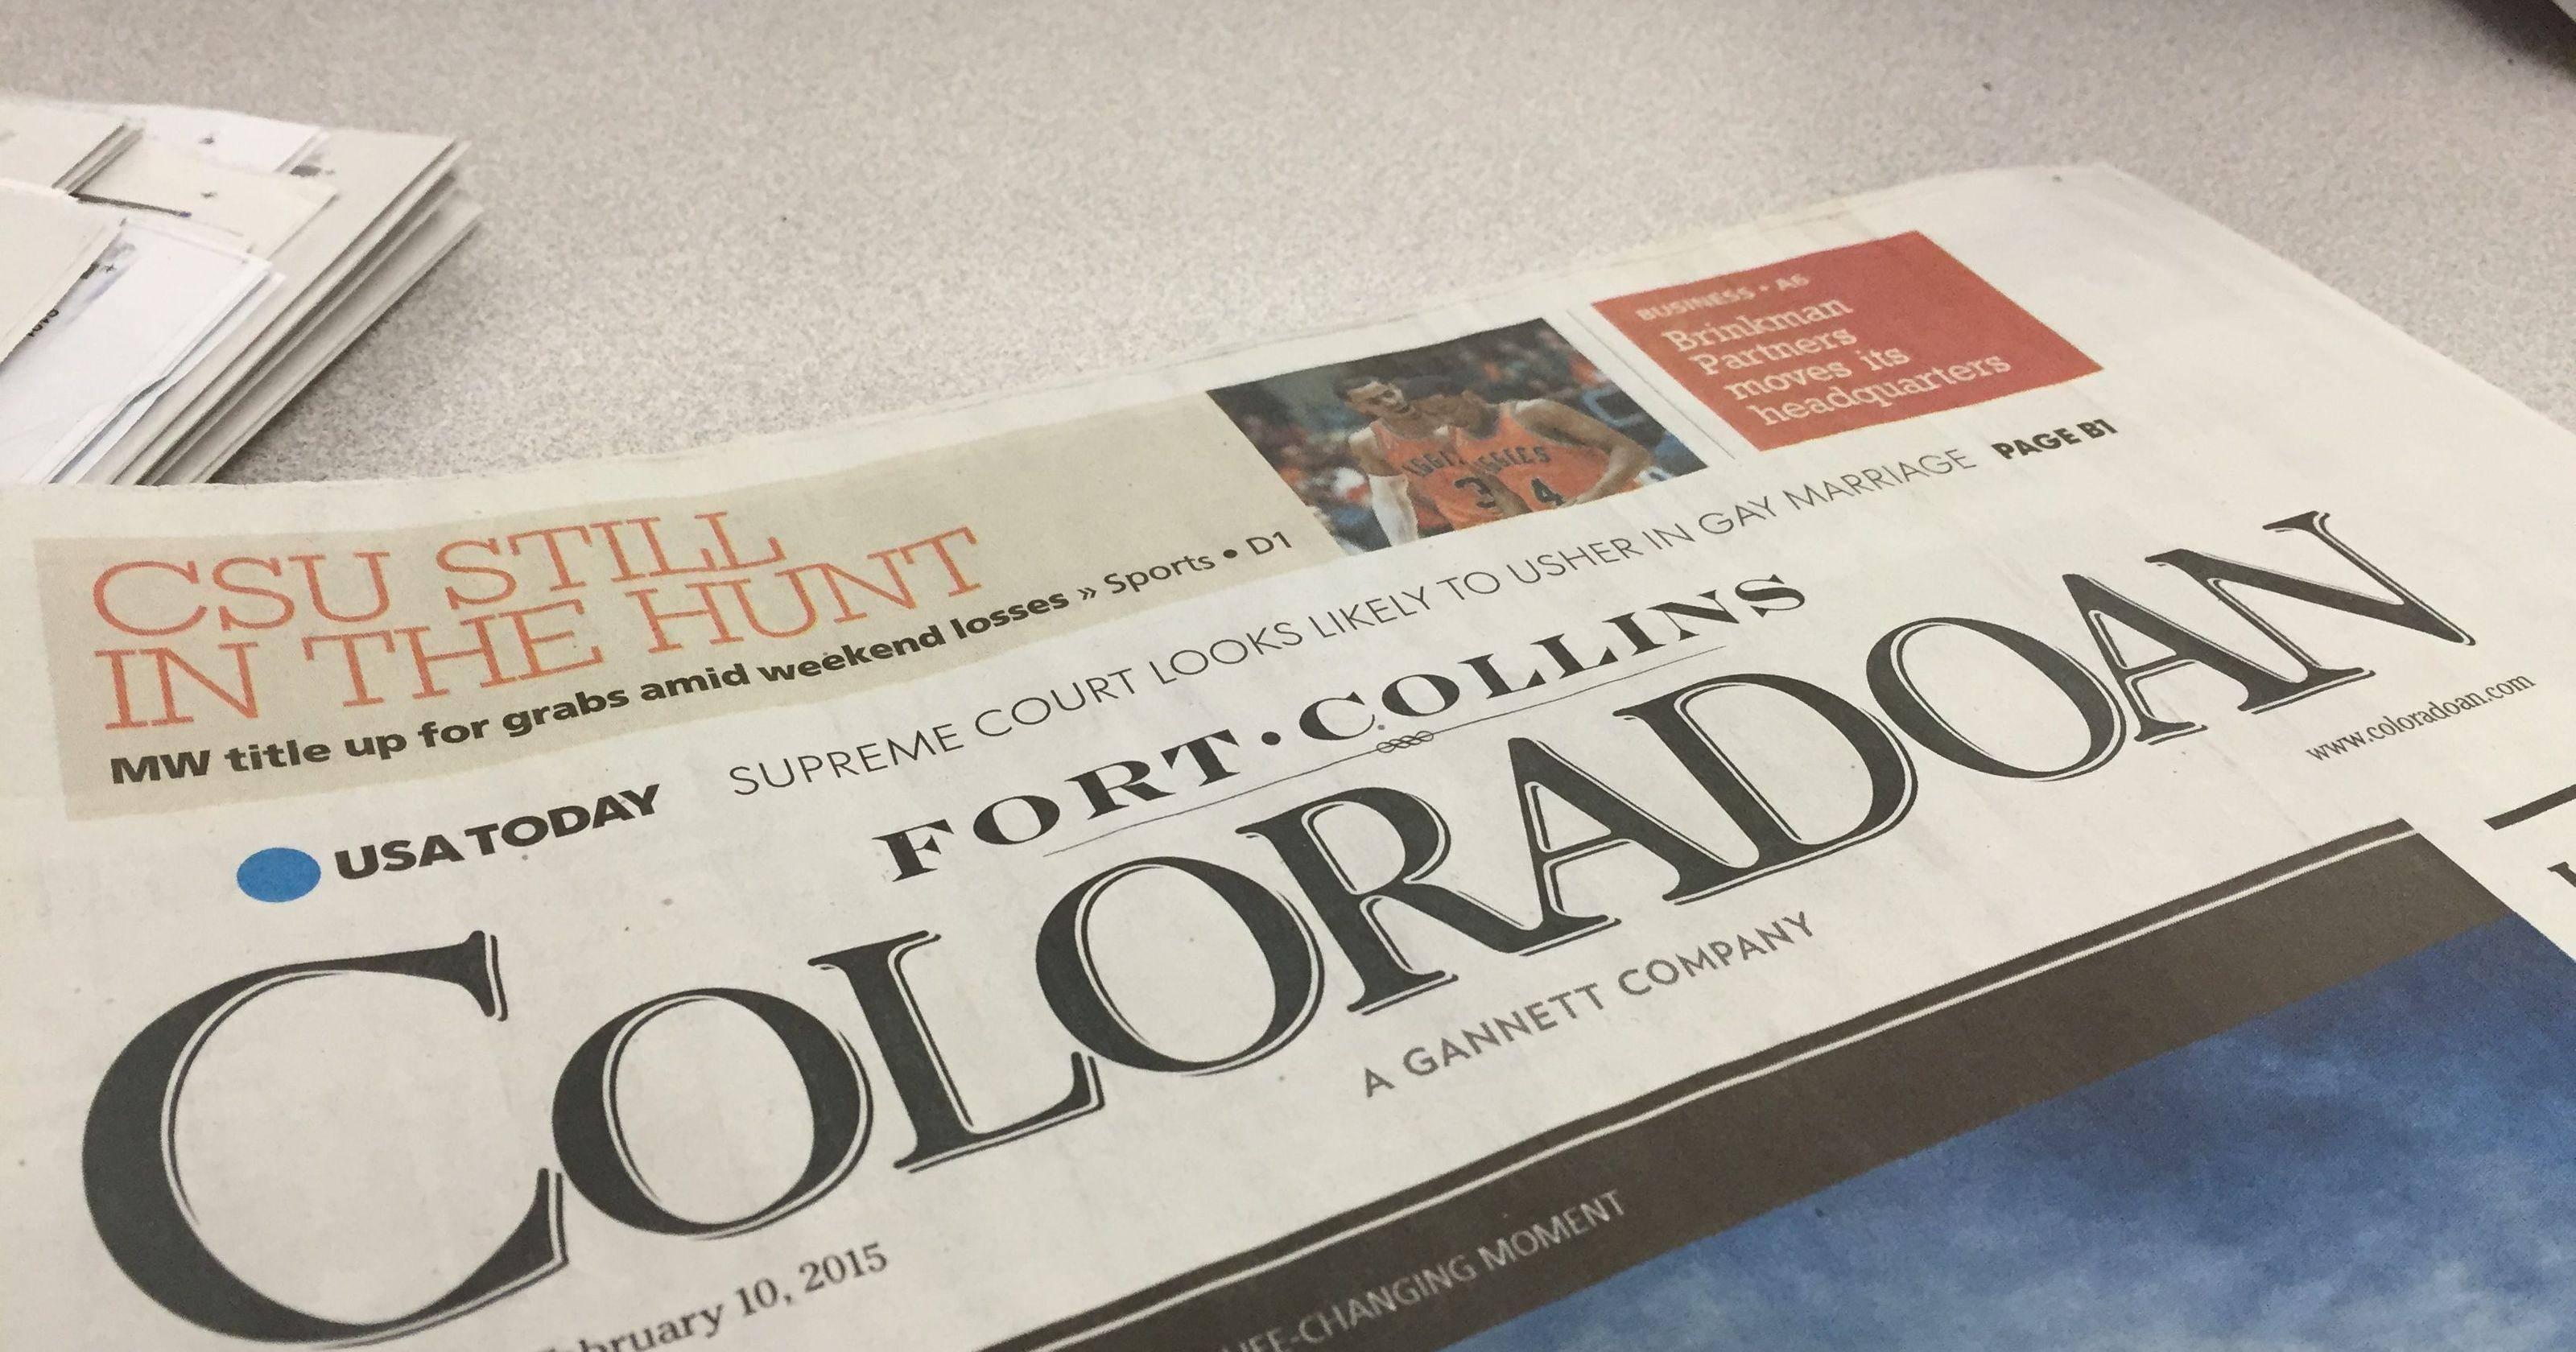 Fort Collins Coloradoan Sunday Only Delivery For 12 Weeks - SureShot Books Publishing LLC